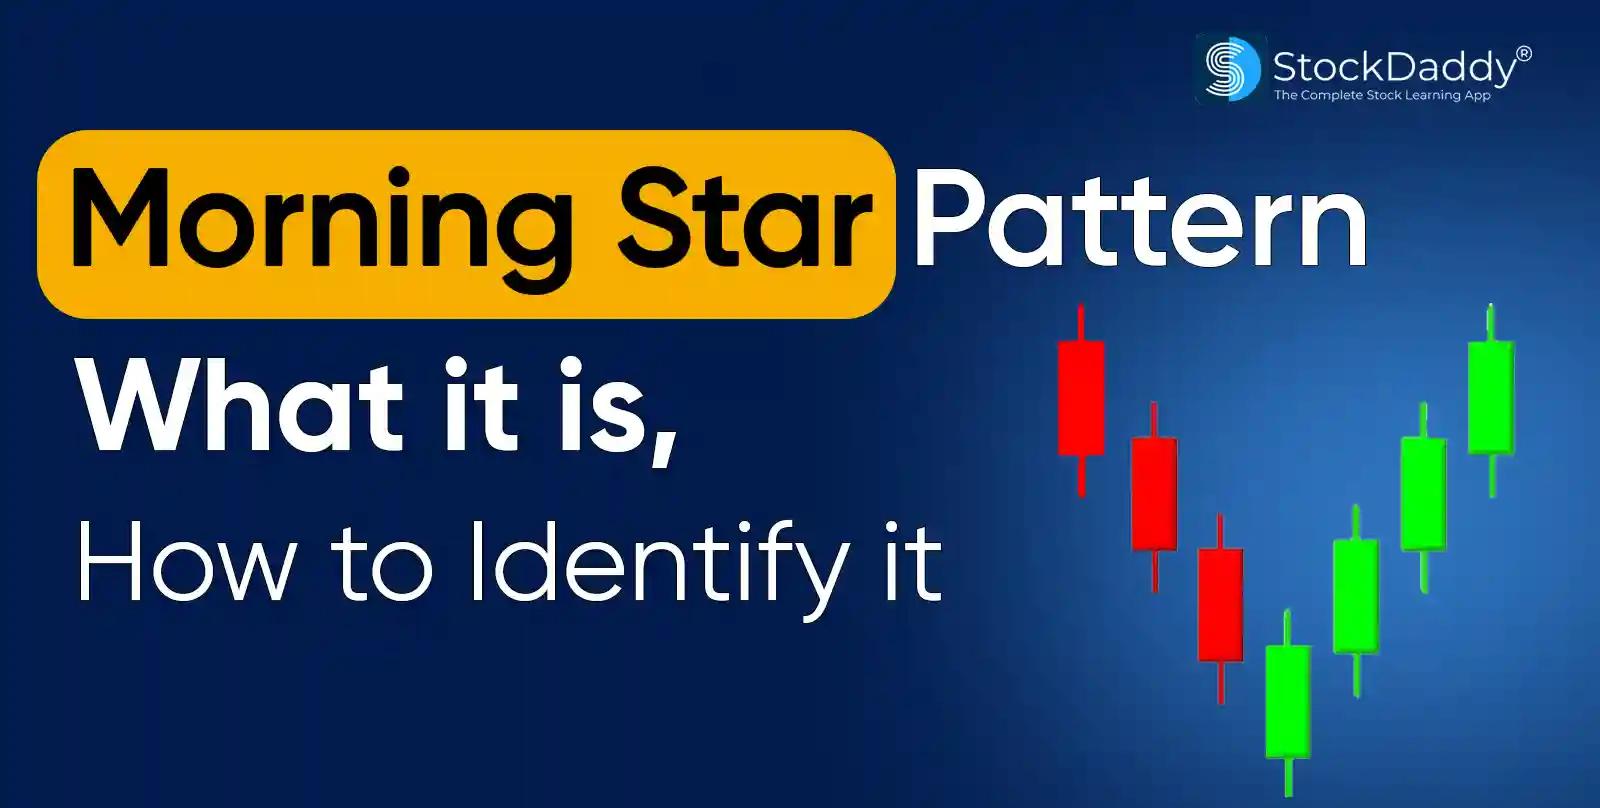 Morning Star Pattern: What It Is, How To Trade and Identify It